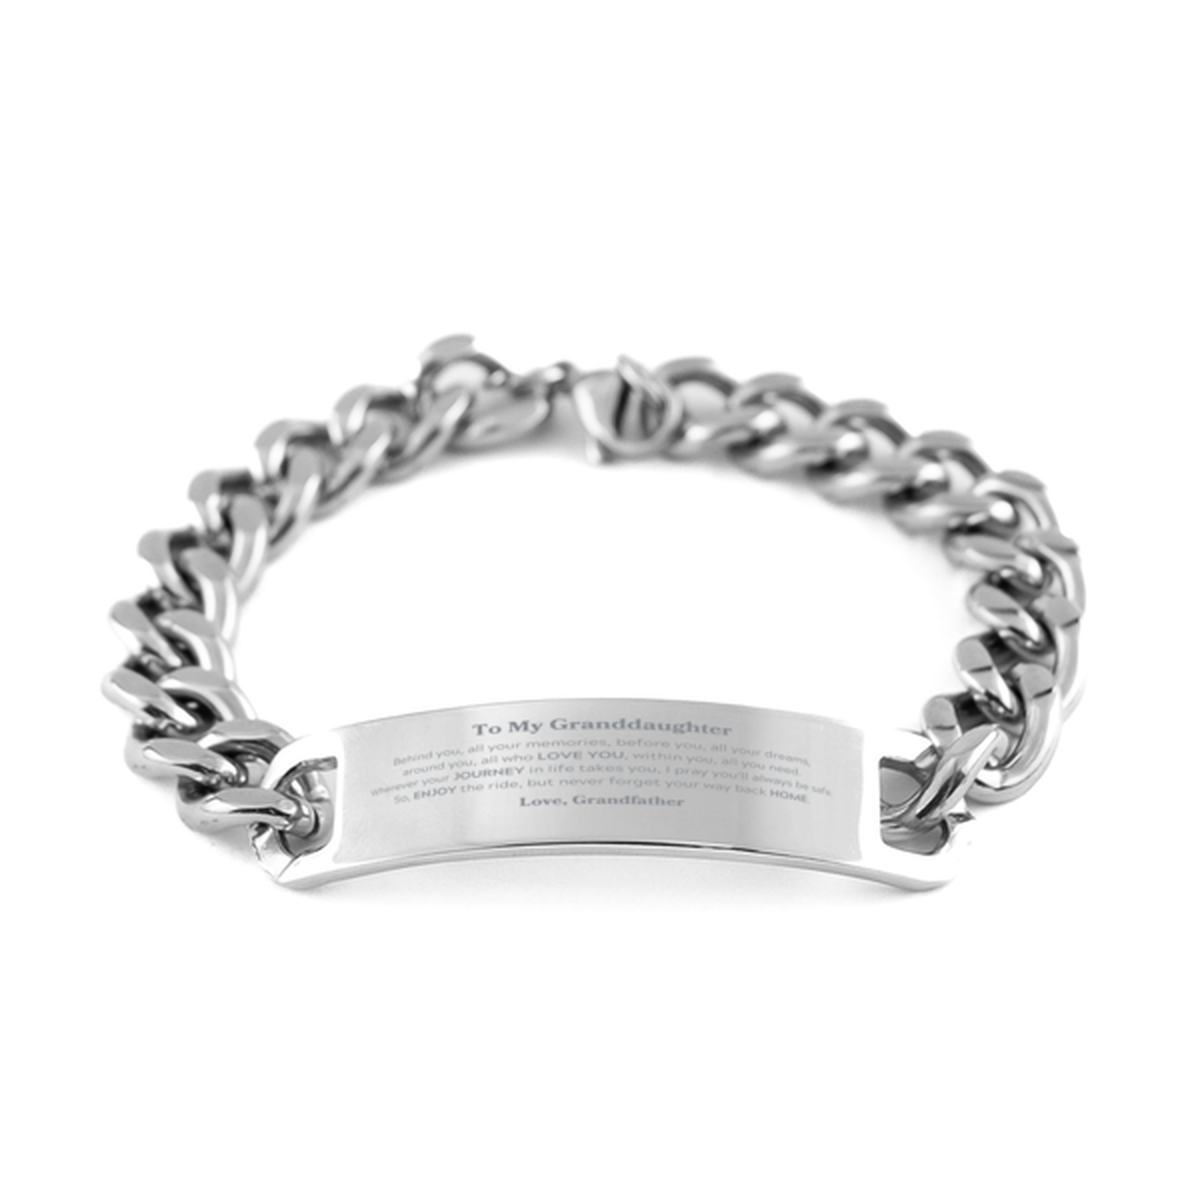 To My Granddaughter Graduation Gifts from Grandfather, Granddaughter Cuban Chain Stainless Steel Bracelet Christmas Birthday Gifts for Granddaughter Behind you, all your memories, before you, all your dreams. Love, Grandfather